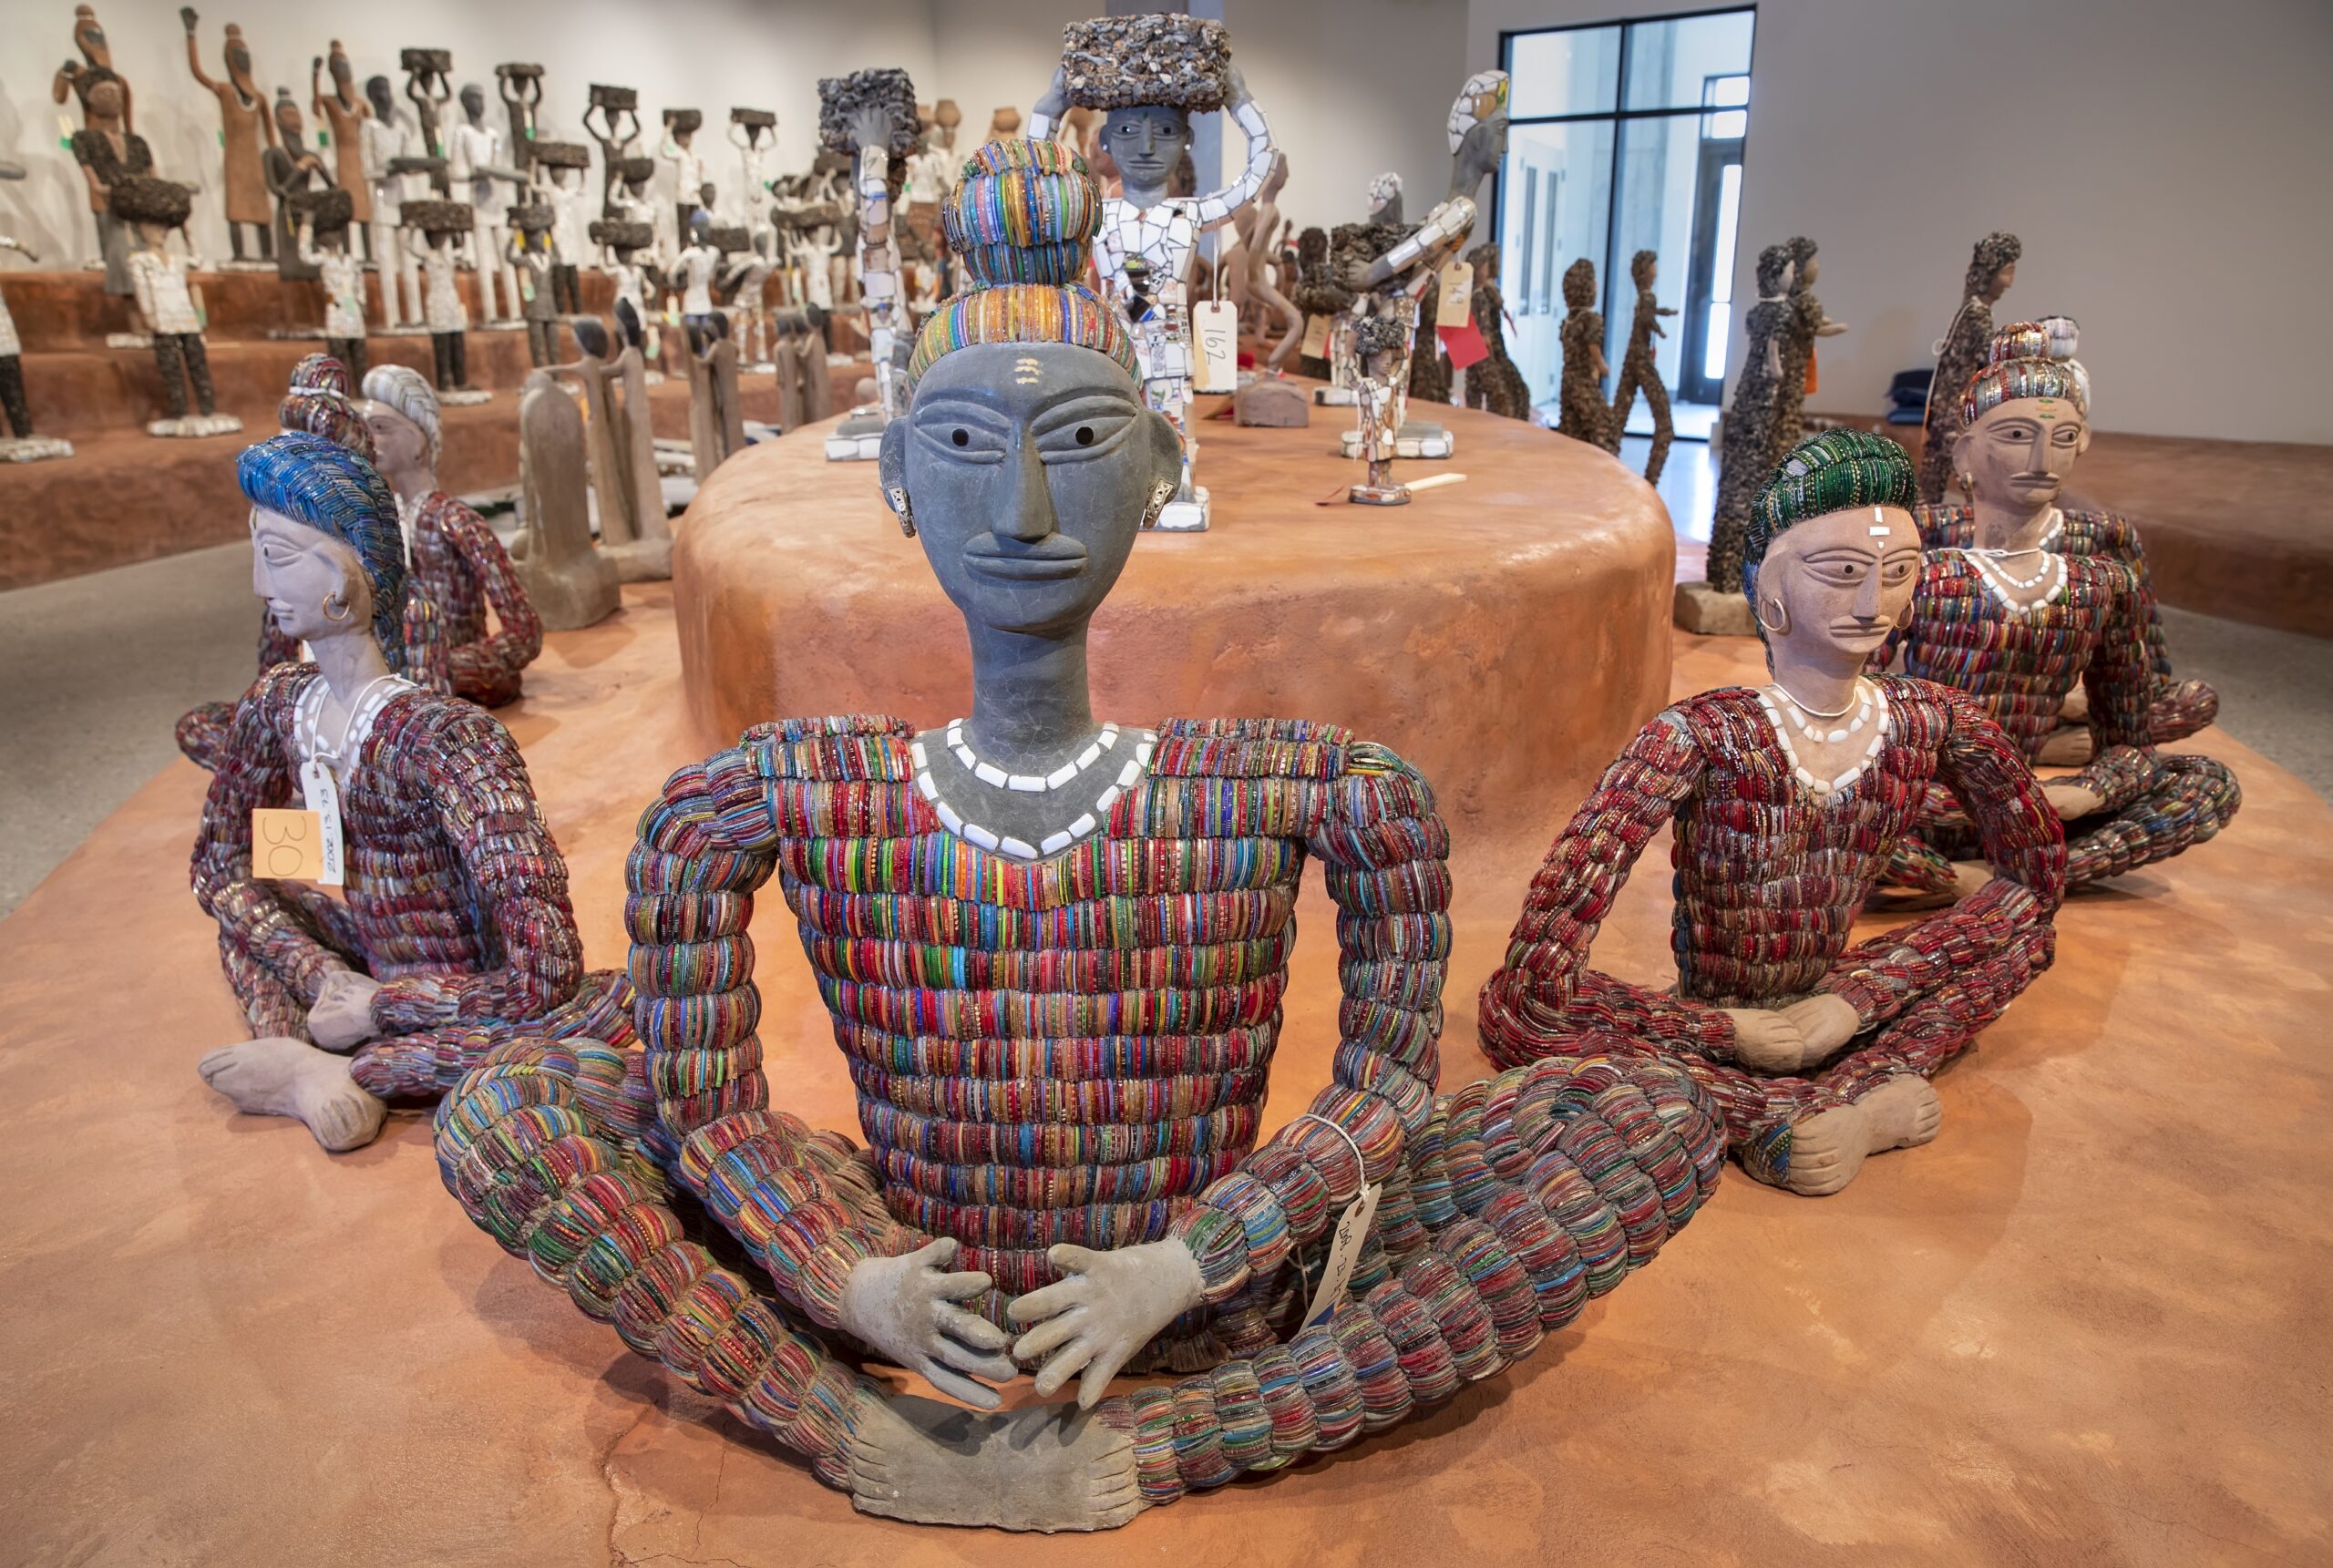 Works by Nek Chand, arranged on tiered platforms at the Art Preserve